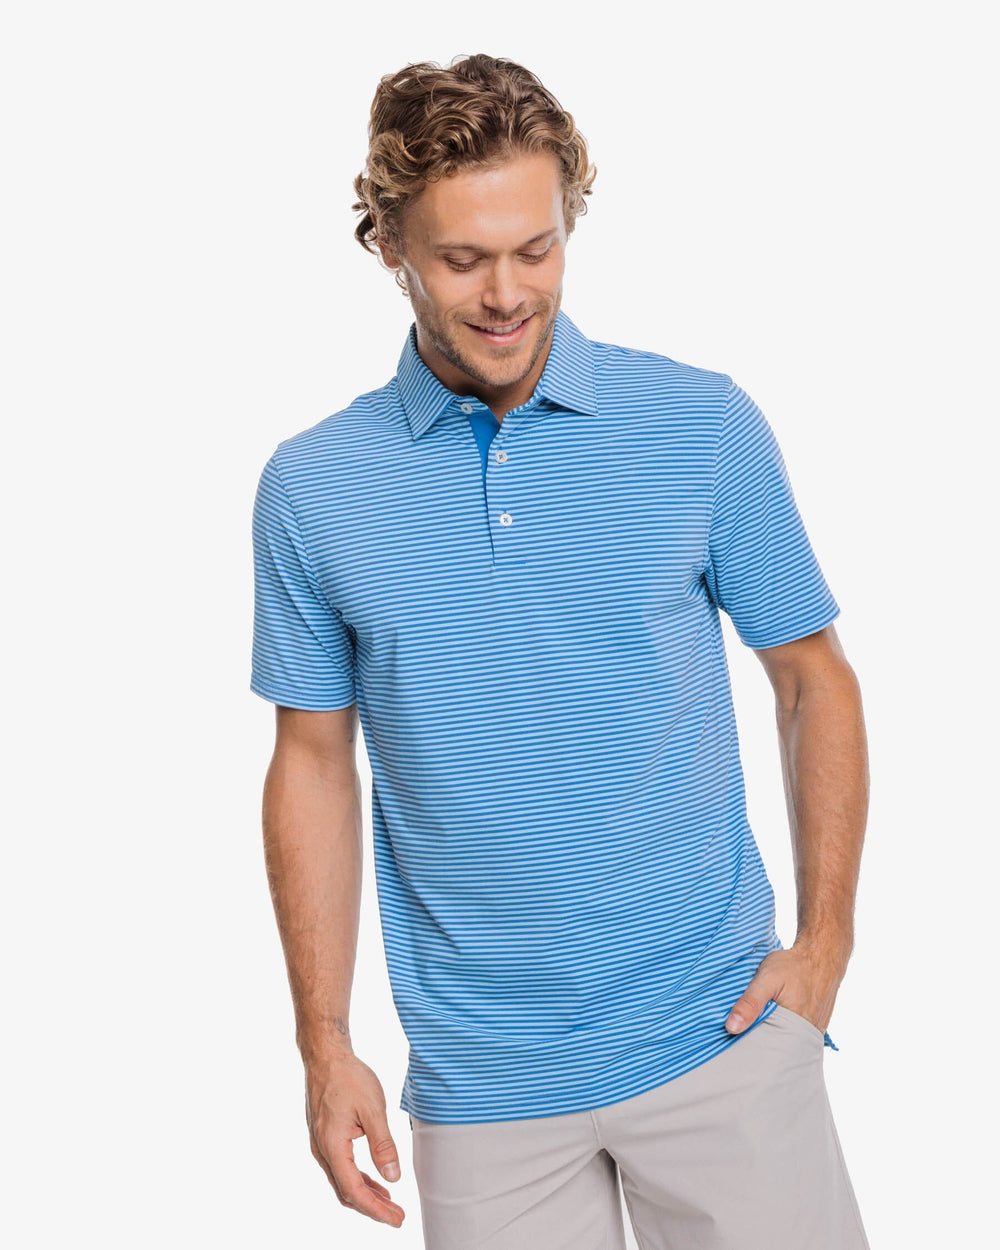 The front view of the Southern Tide Shores Stripe brrr eeze Performance Polo Shirt by Southern Tide - Rain Water